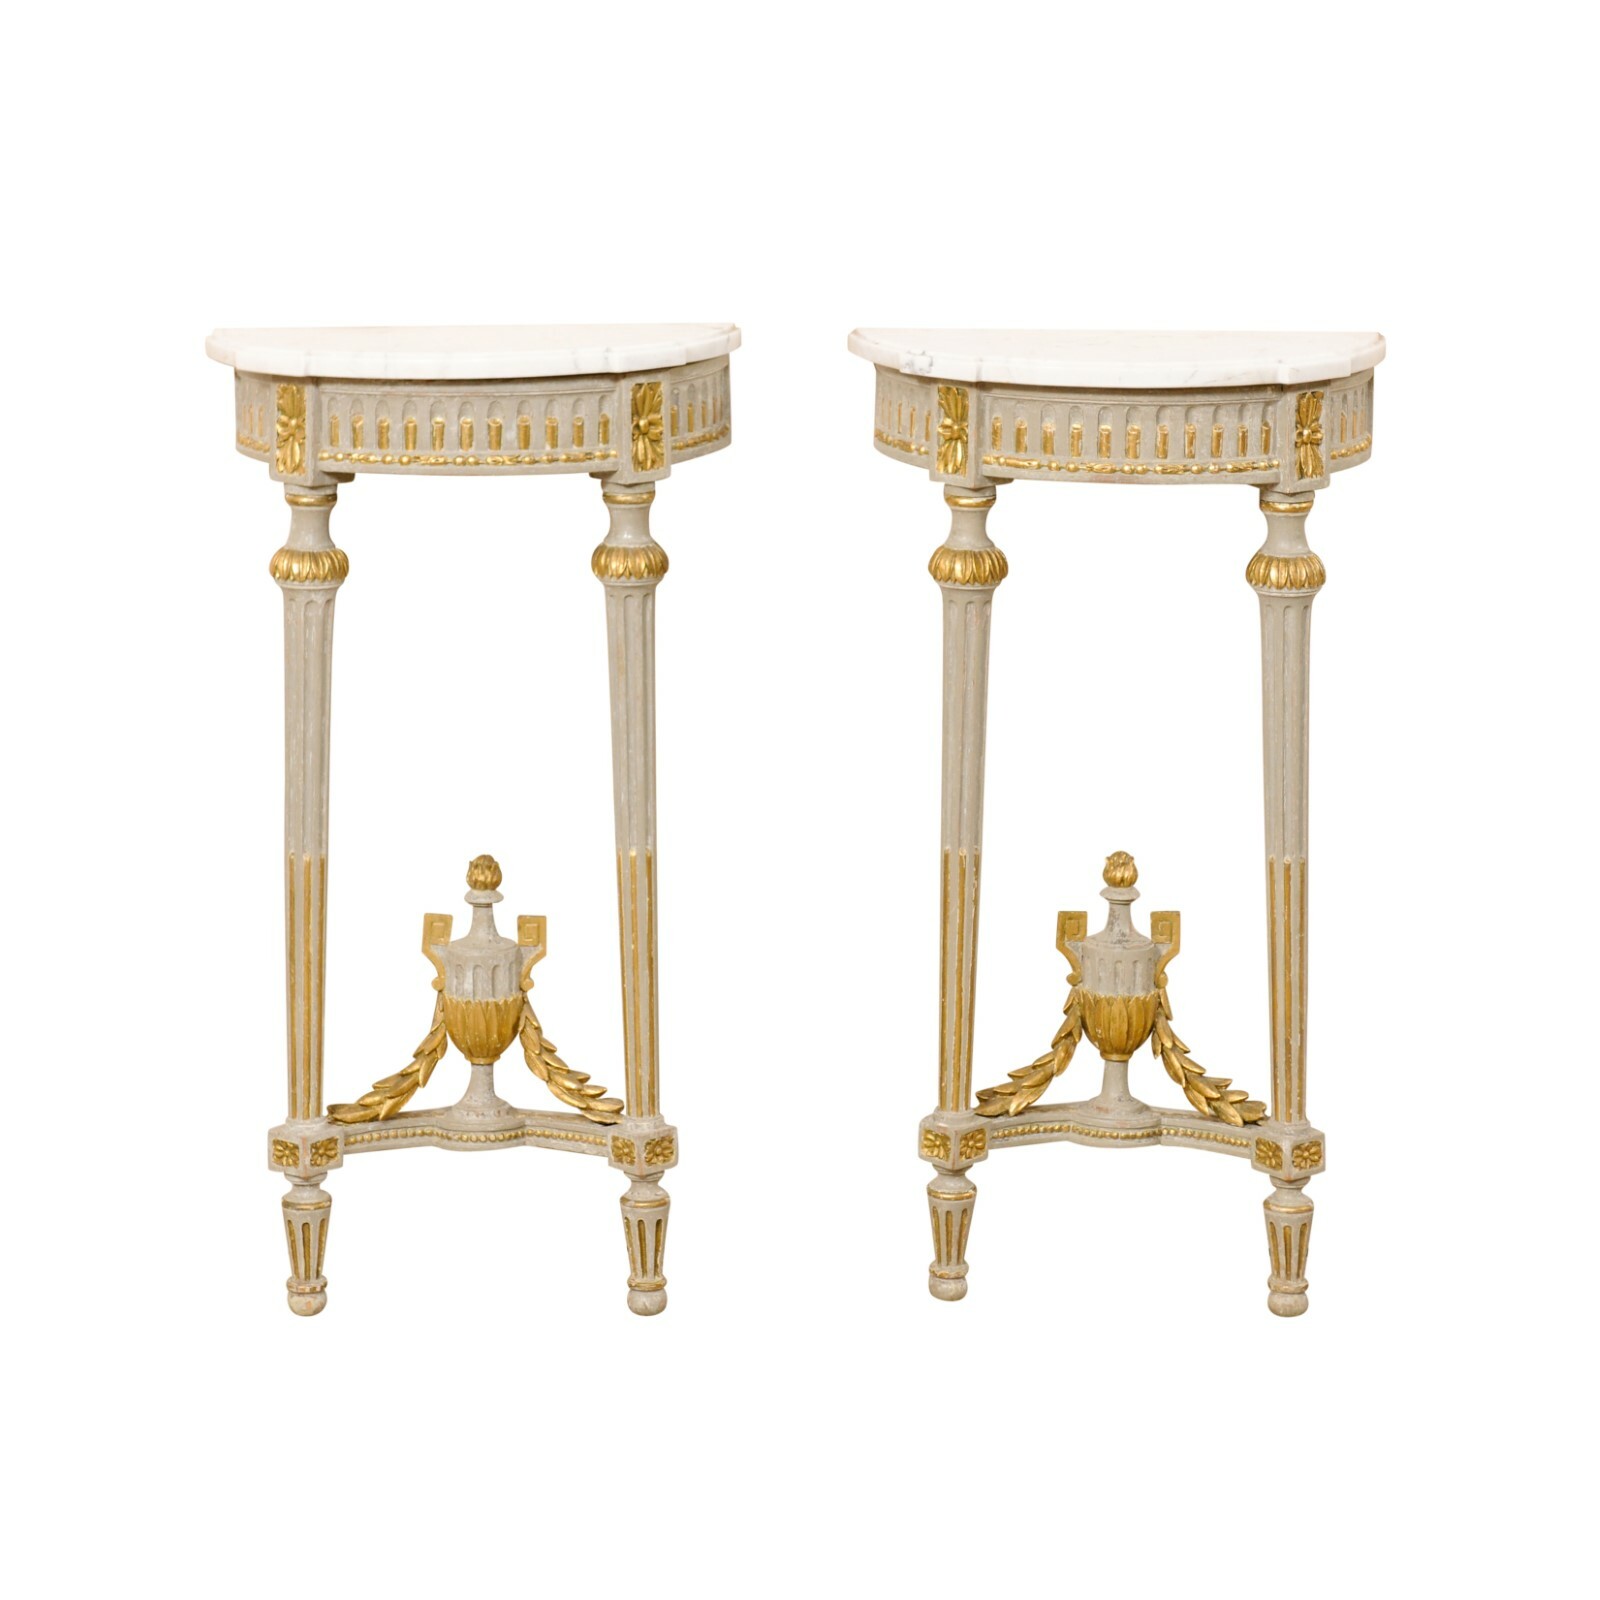 Petite Neoclassic Marble Top Wall Consoles